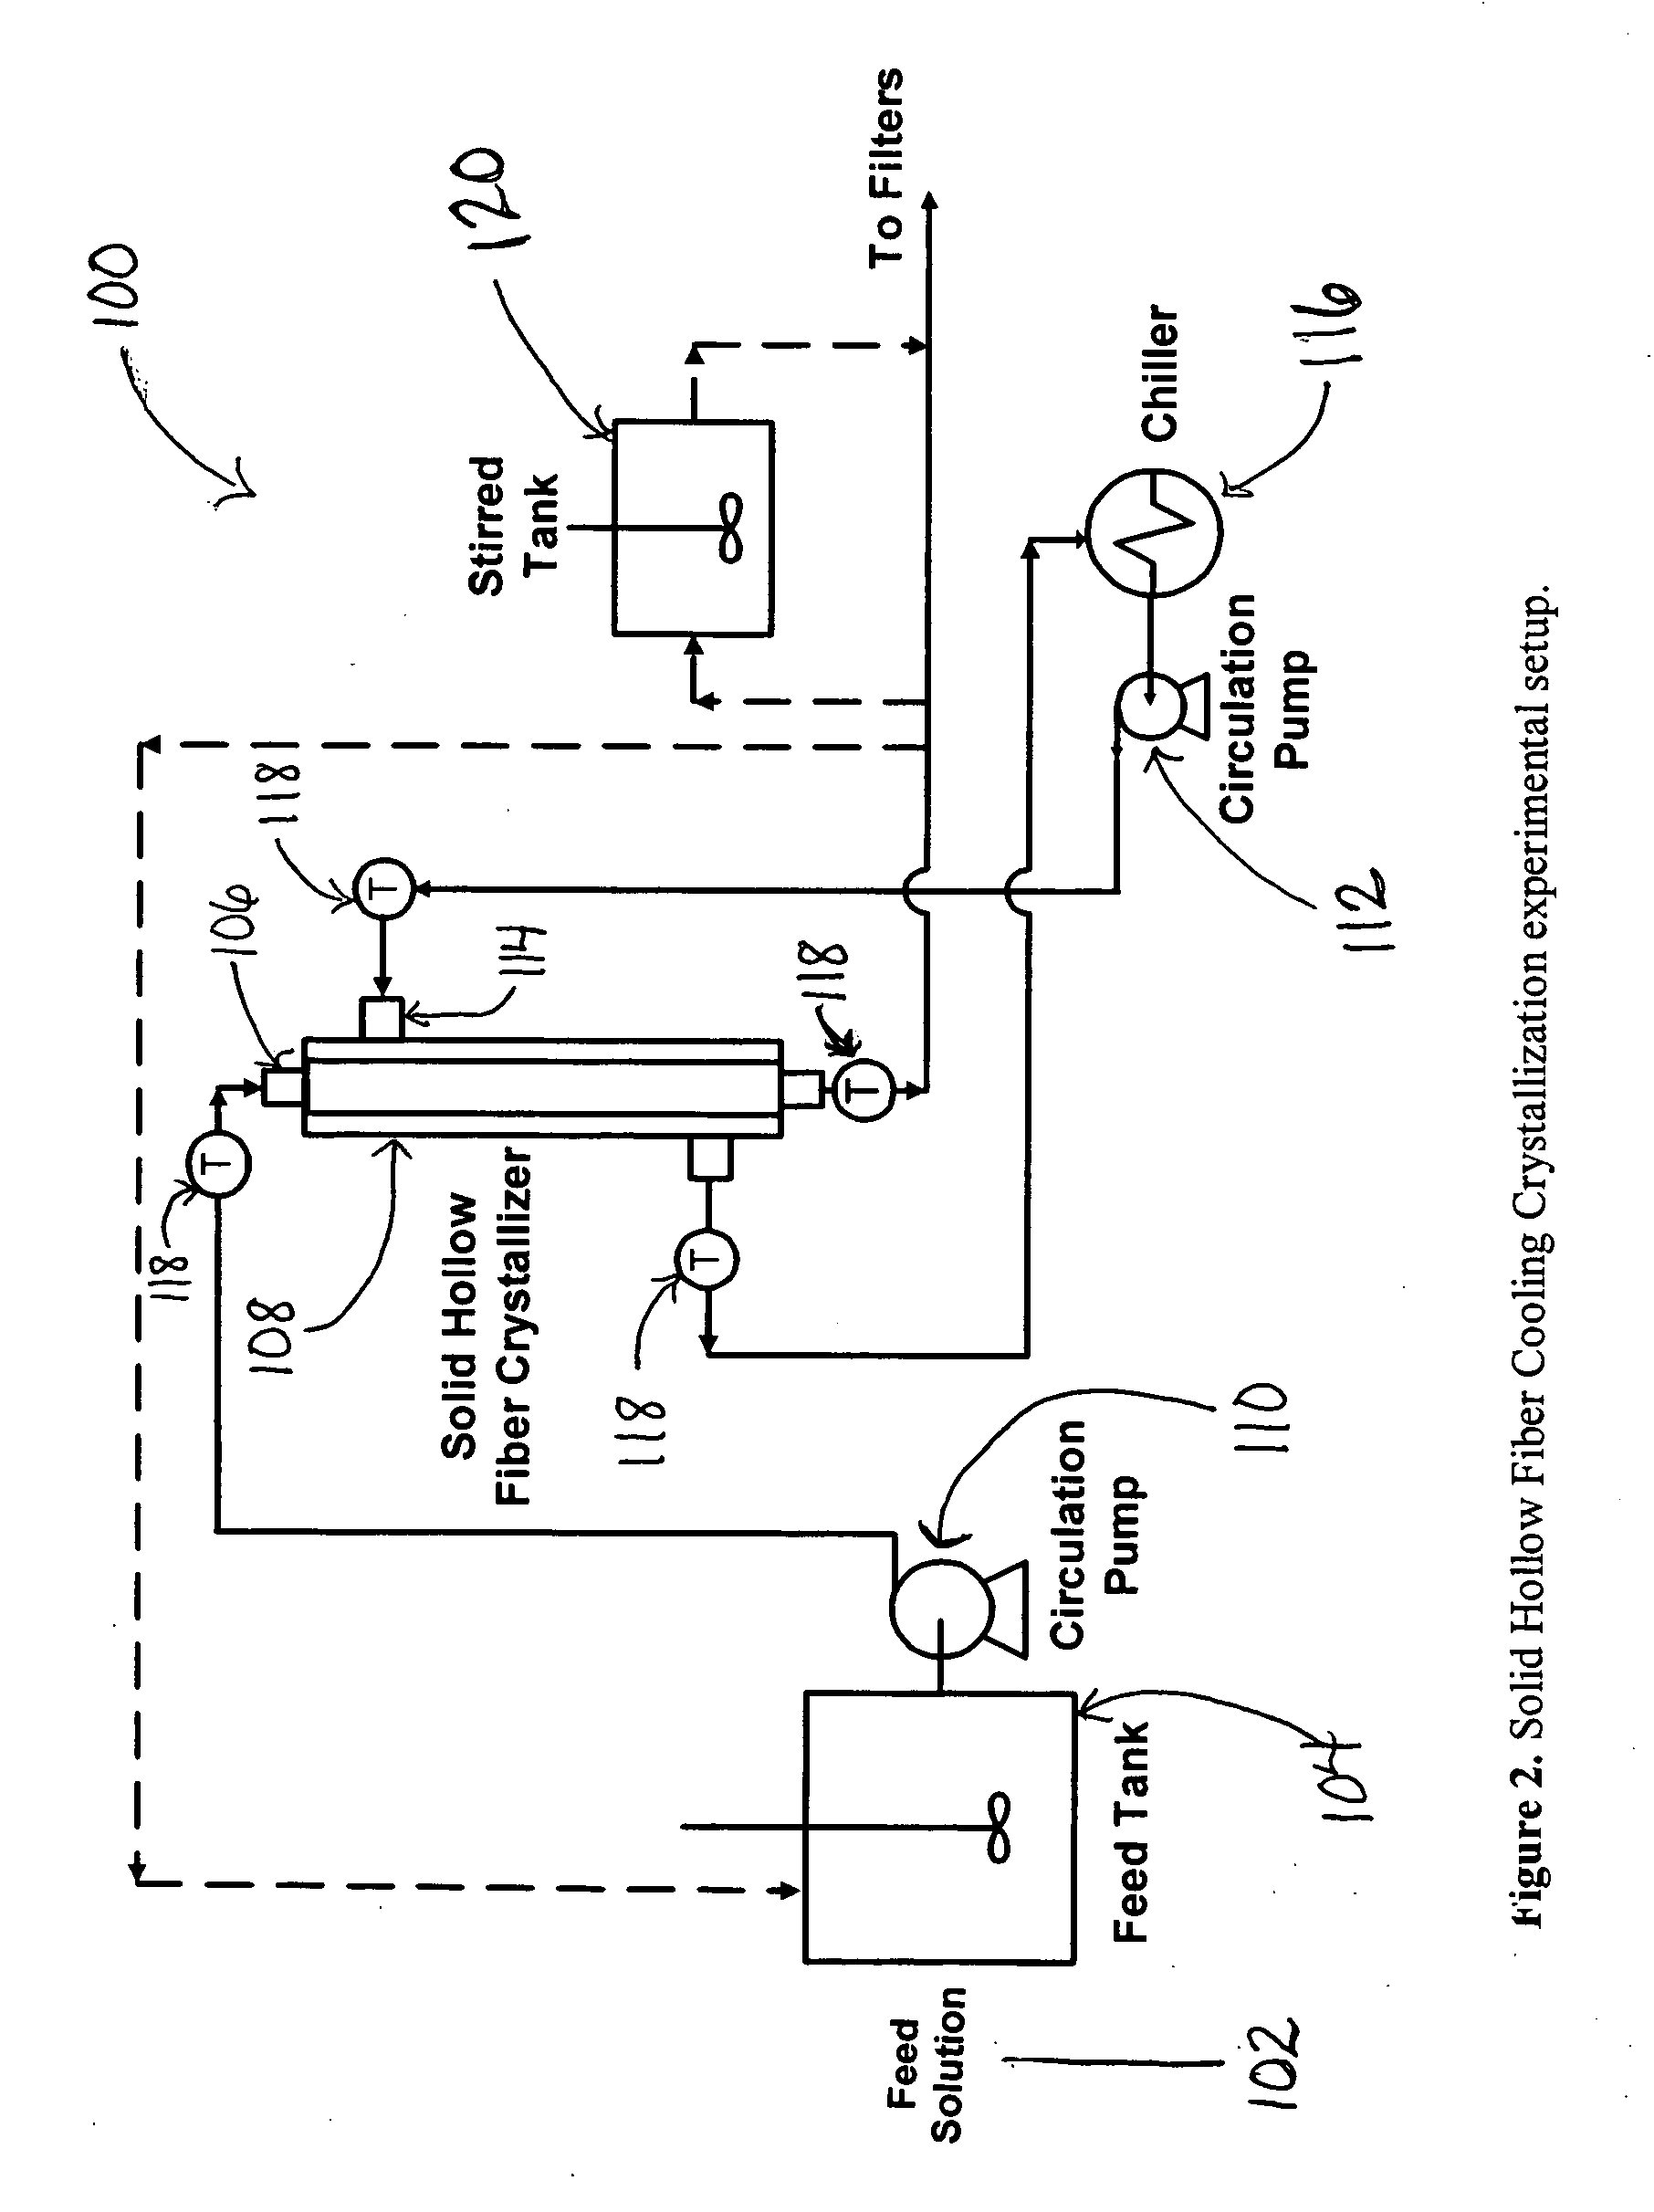 Solid hollow fiber cooling crystallization systems and methods